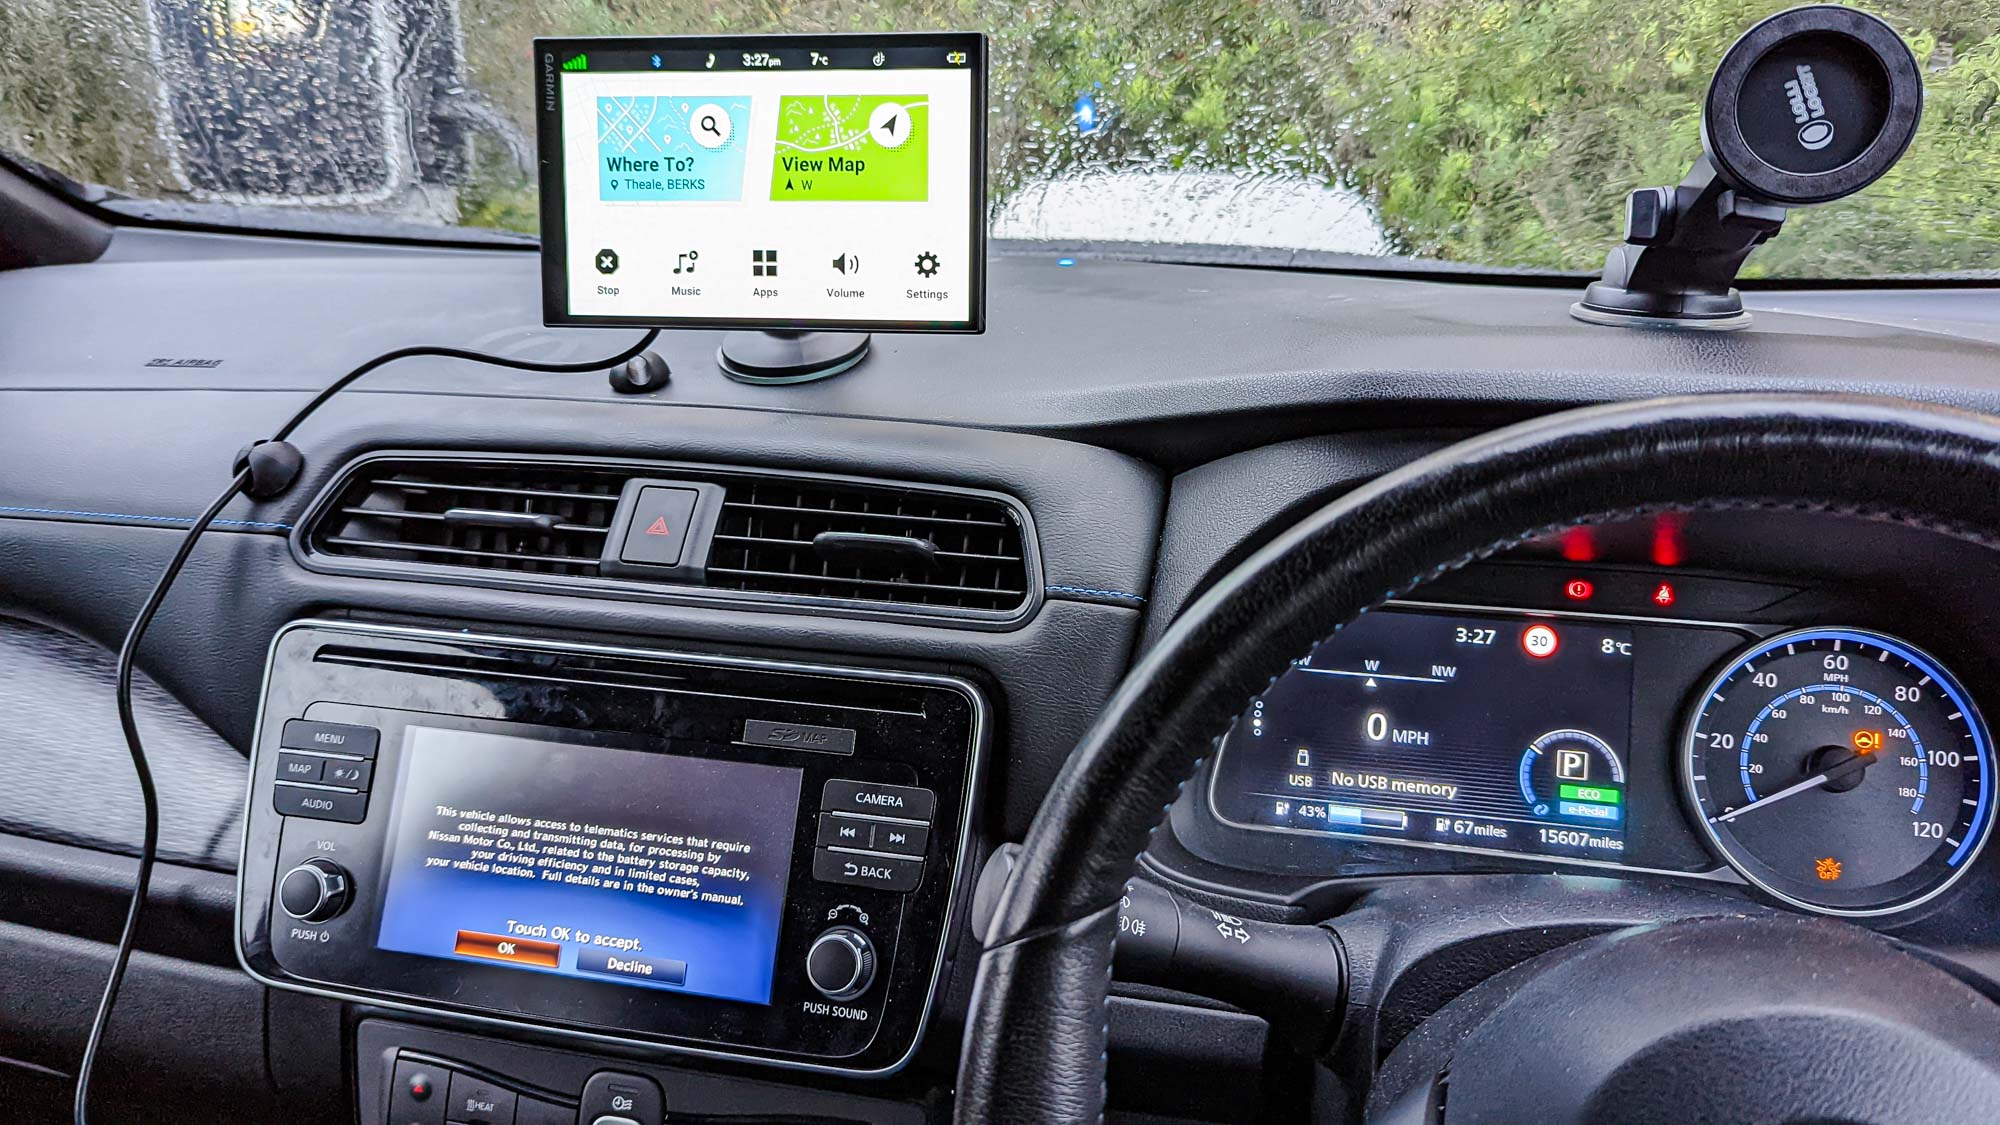 Garmin DriveSmart 86 Trying and failing to compete with the smartphone | Tom's Guide